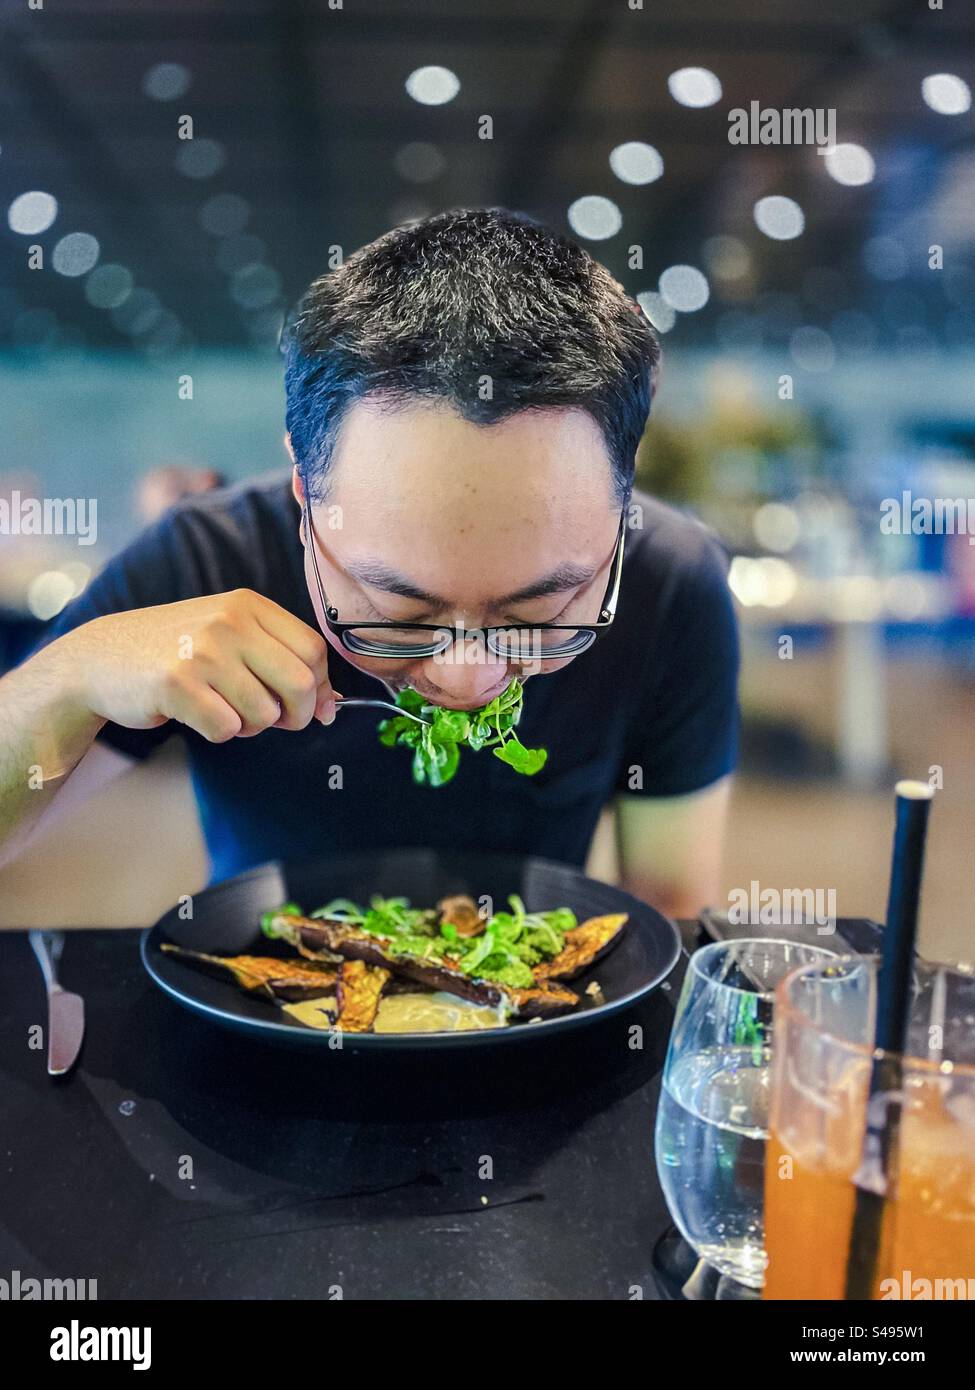 A man in eyeglasses enjoying a meal of fresh salad greens and miso marinated, roasted eggplants at table in restaurant. Healthy eating. Vegetarian meal. Focus on foreground. Stock Photo